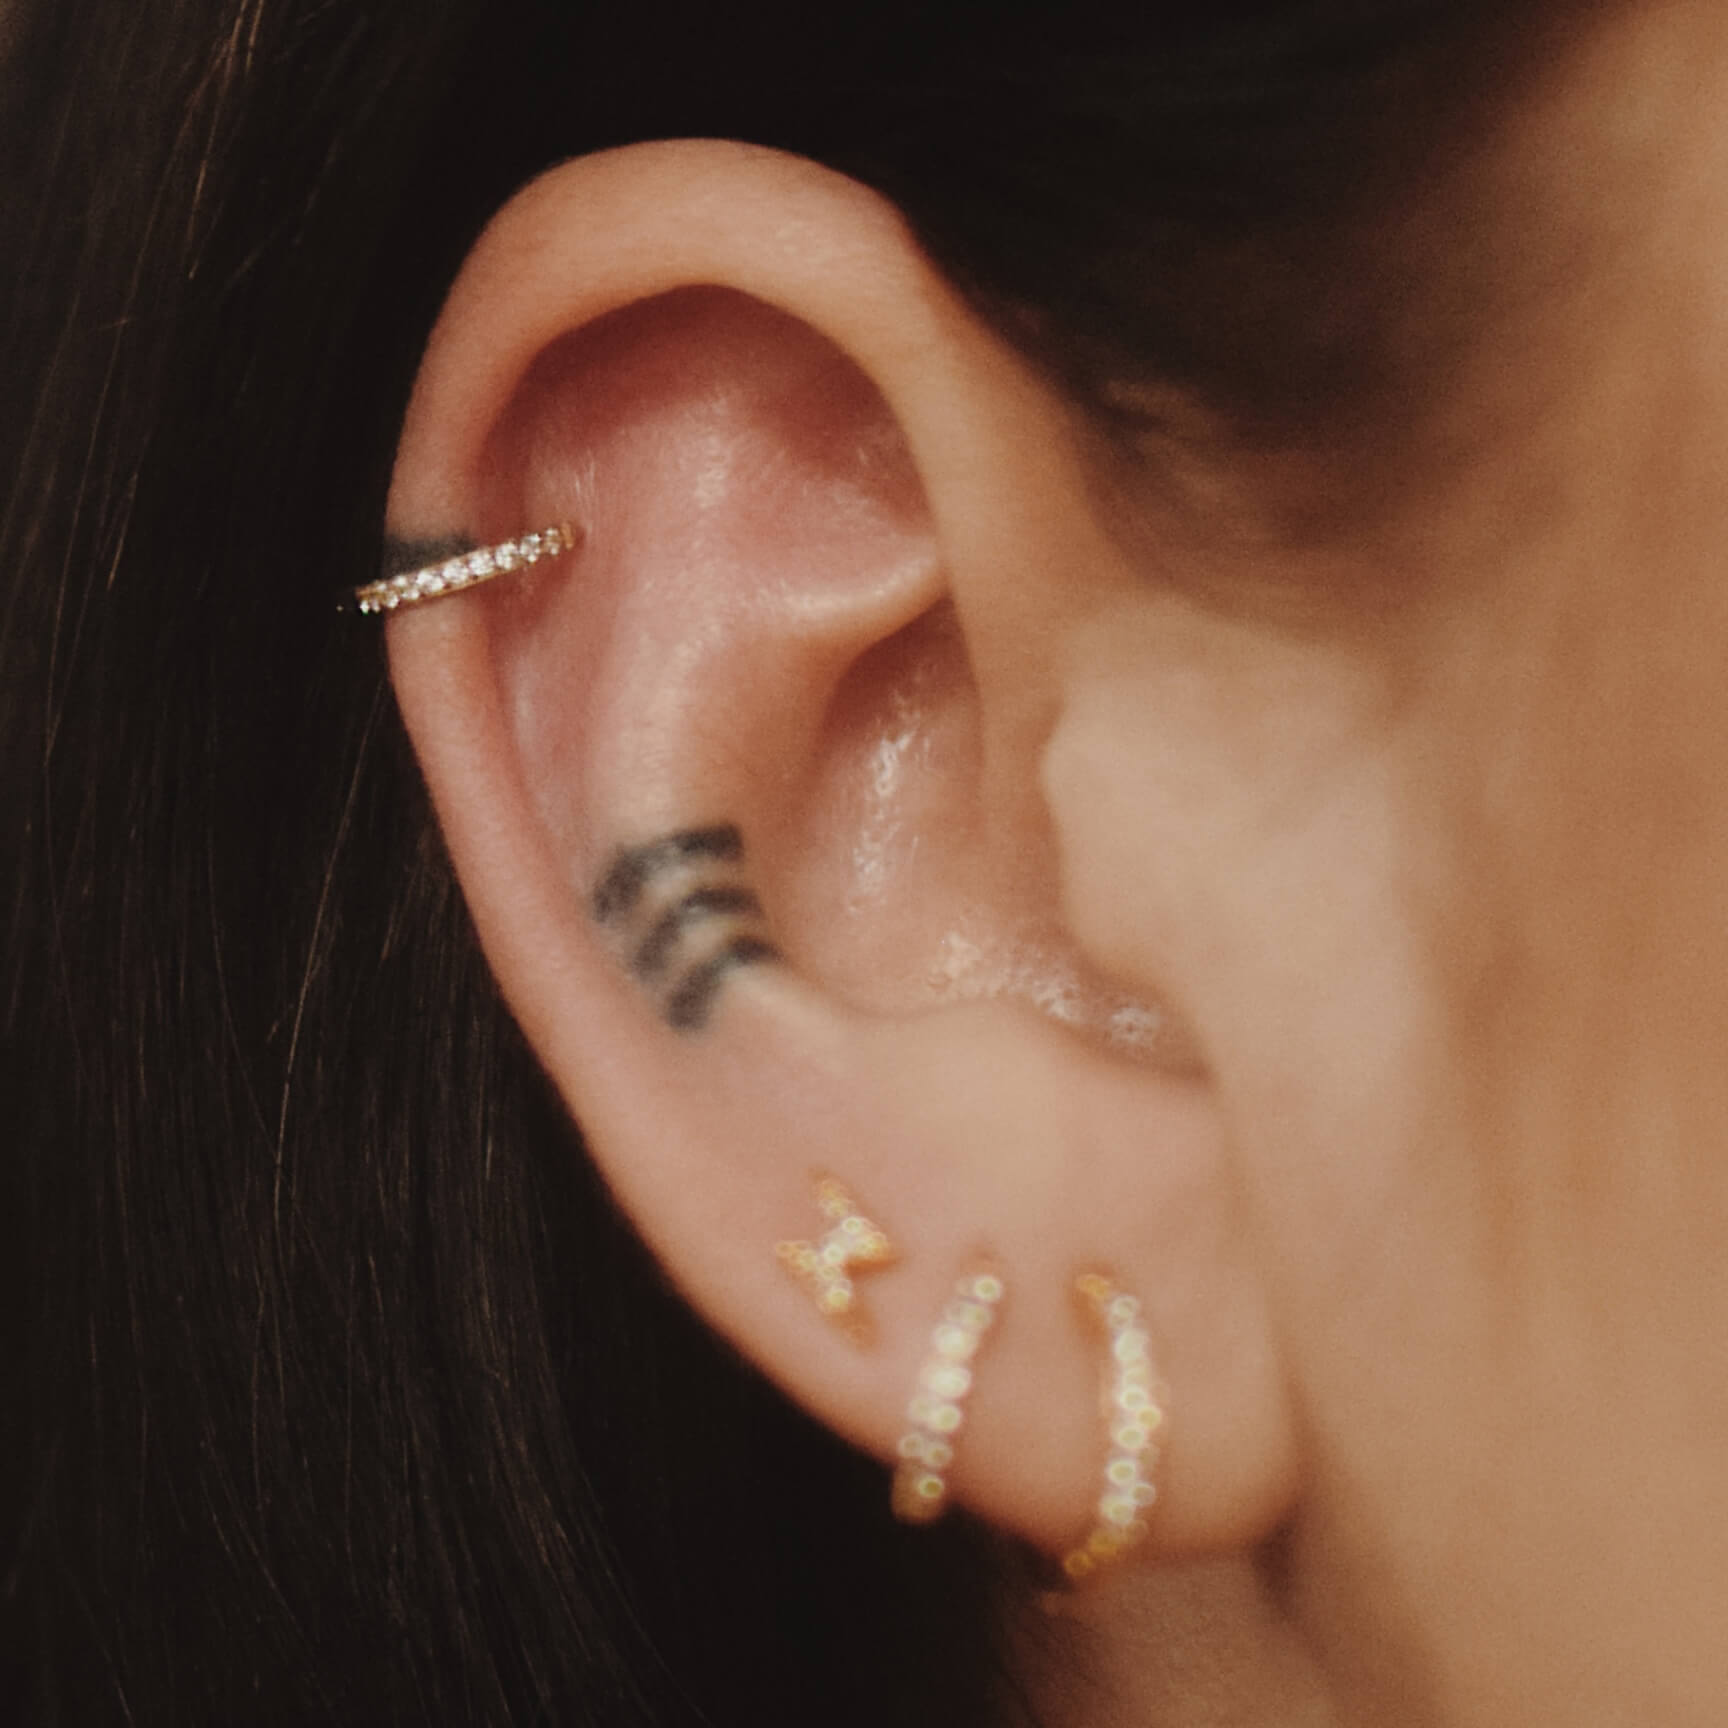 9 Types of Ear Piercings, From Lobes to Cartilage | Allure